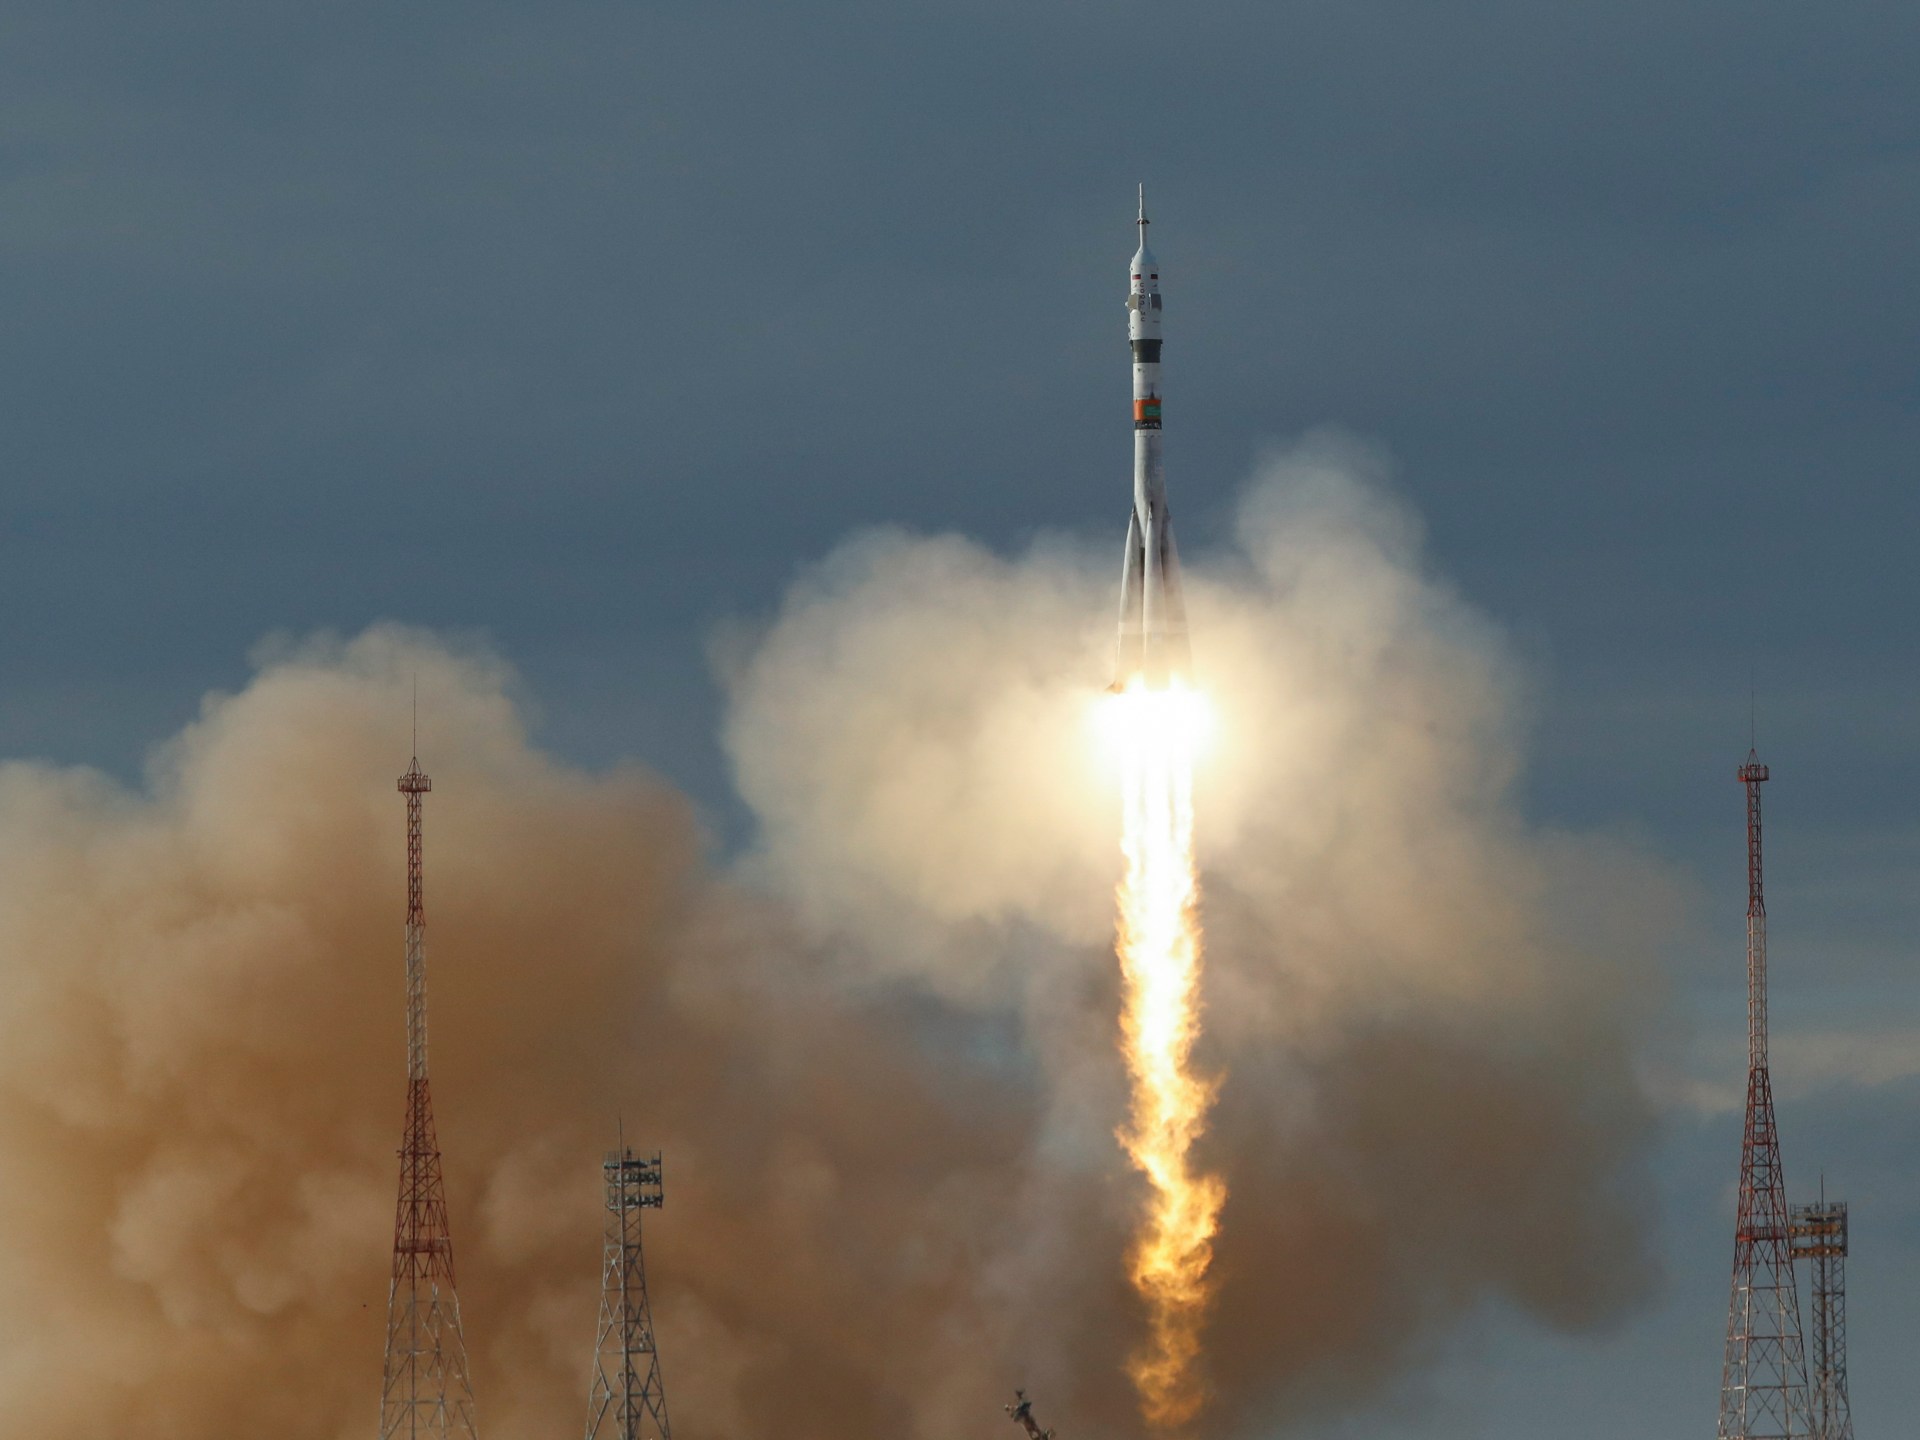 Russian Soyuz rocket with 3 astronauts blasts off to ISS, days after glitch | Space News